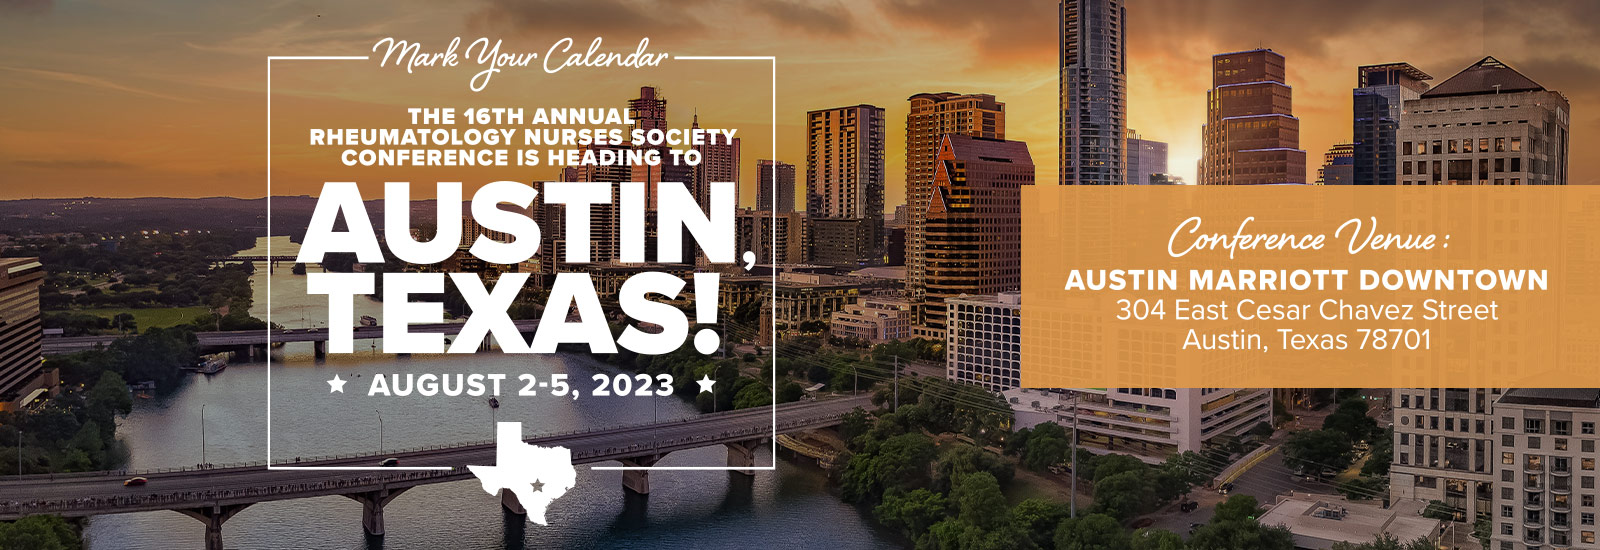 2023 16th Annual RNS Conference - Aug. 2-5 - Austin, TX